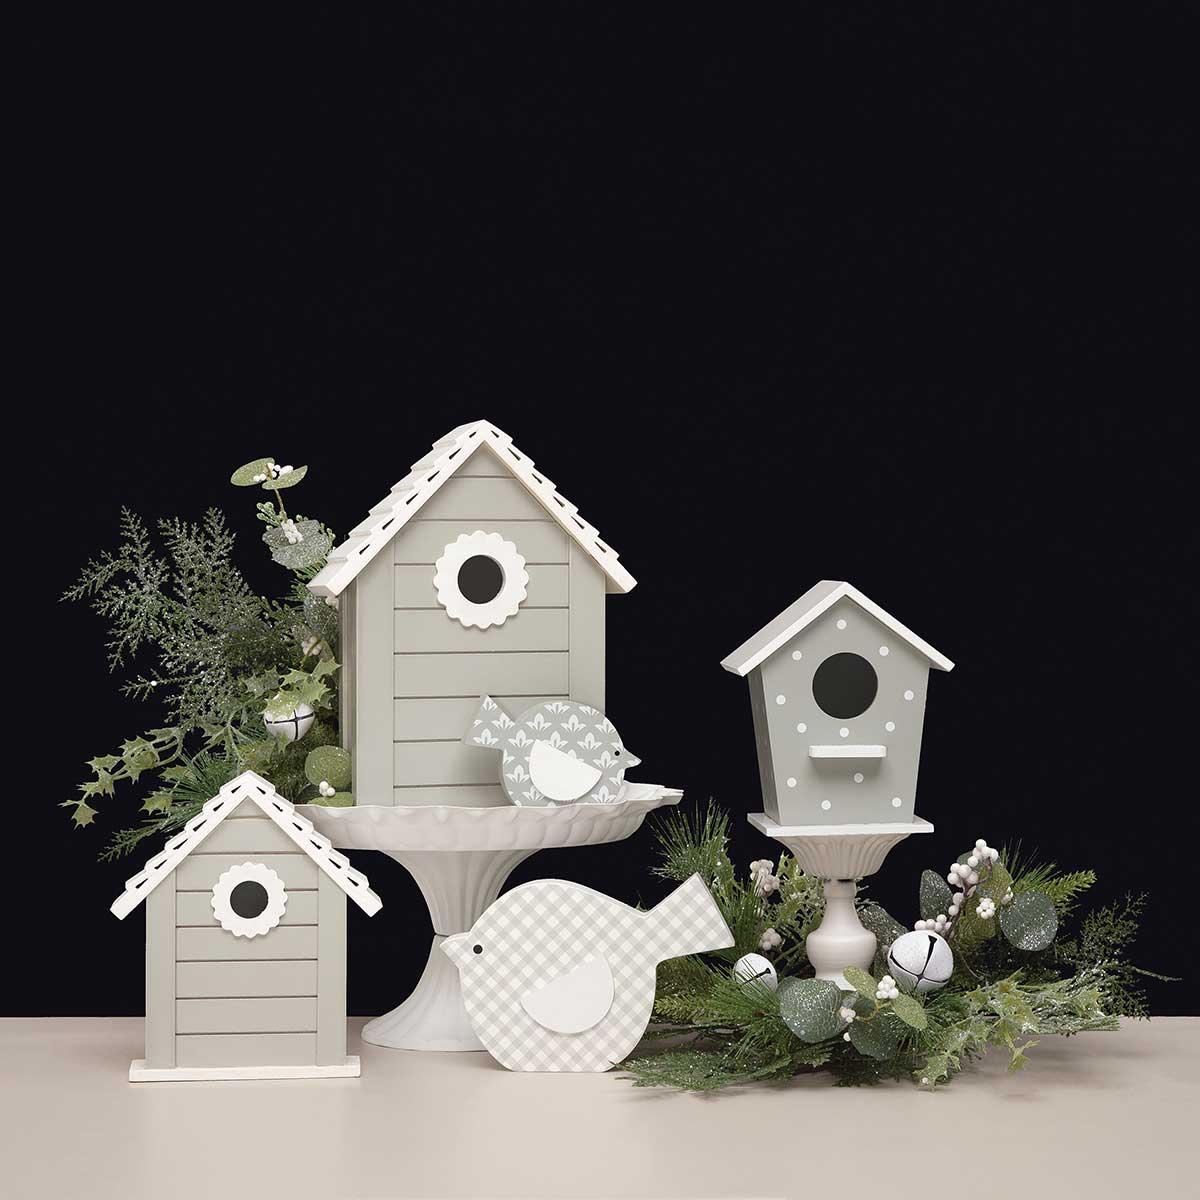 b50 BIRDHOUSE SLAT GREY LARGE 7.75IN X 2.5IN X 10IN WOOD - Click Image to Close